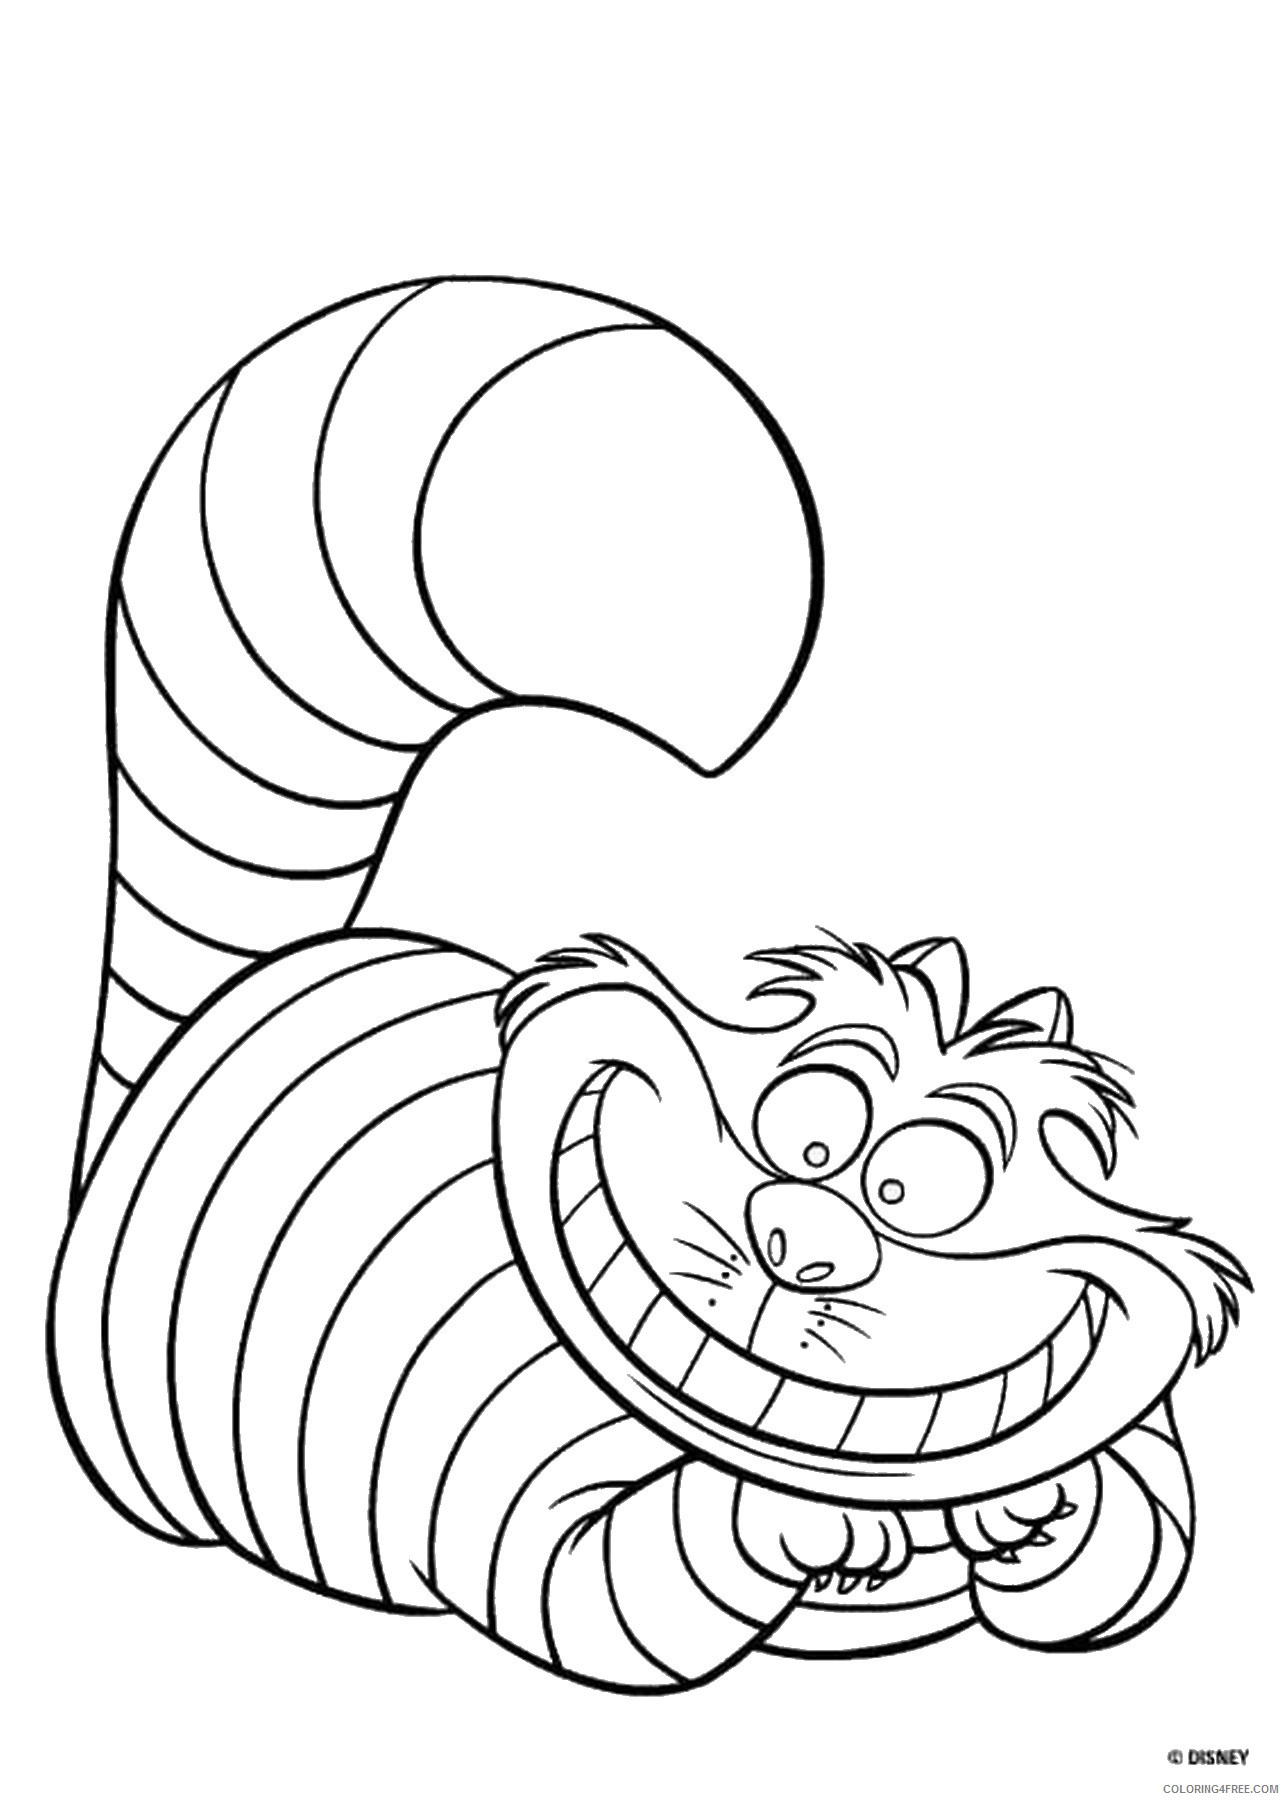 Alice in Wonderland Coloring Pages Cartoons alice_23 Printable 2020 0356 Coloring4free